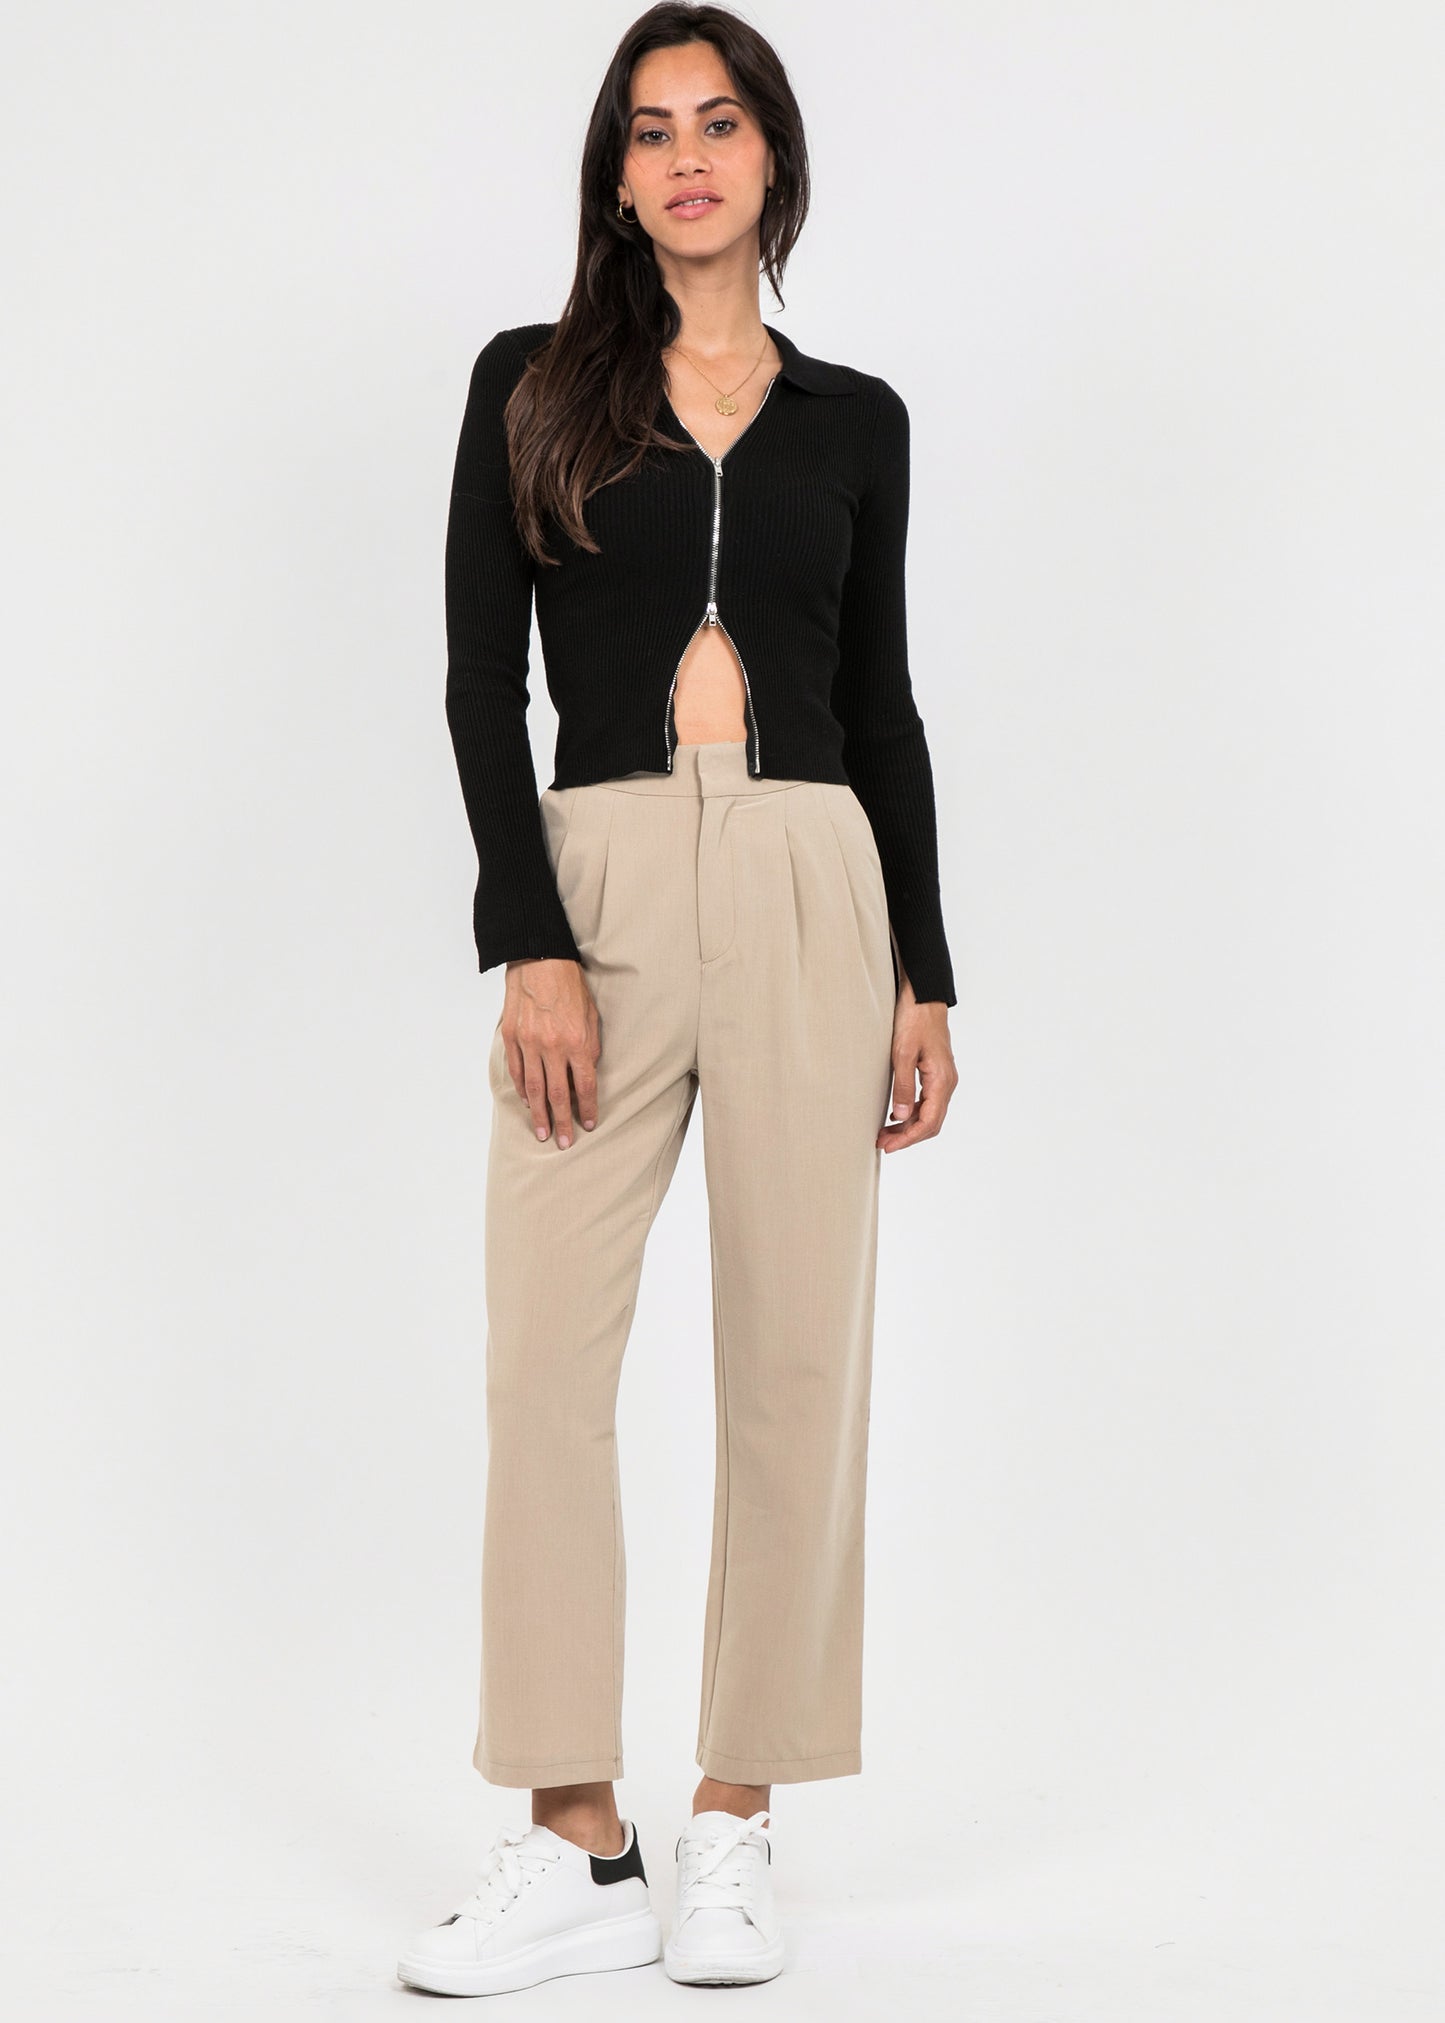 Tailored trousers in beige